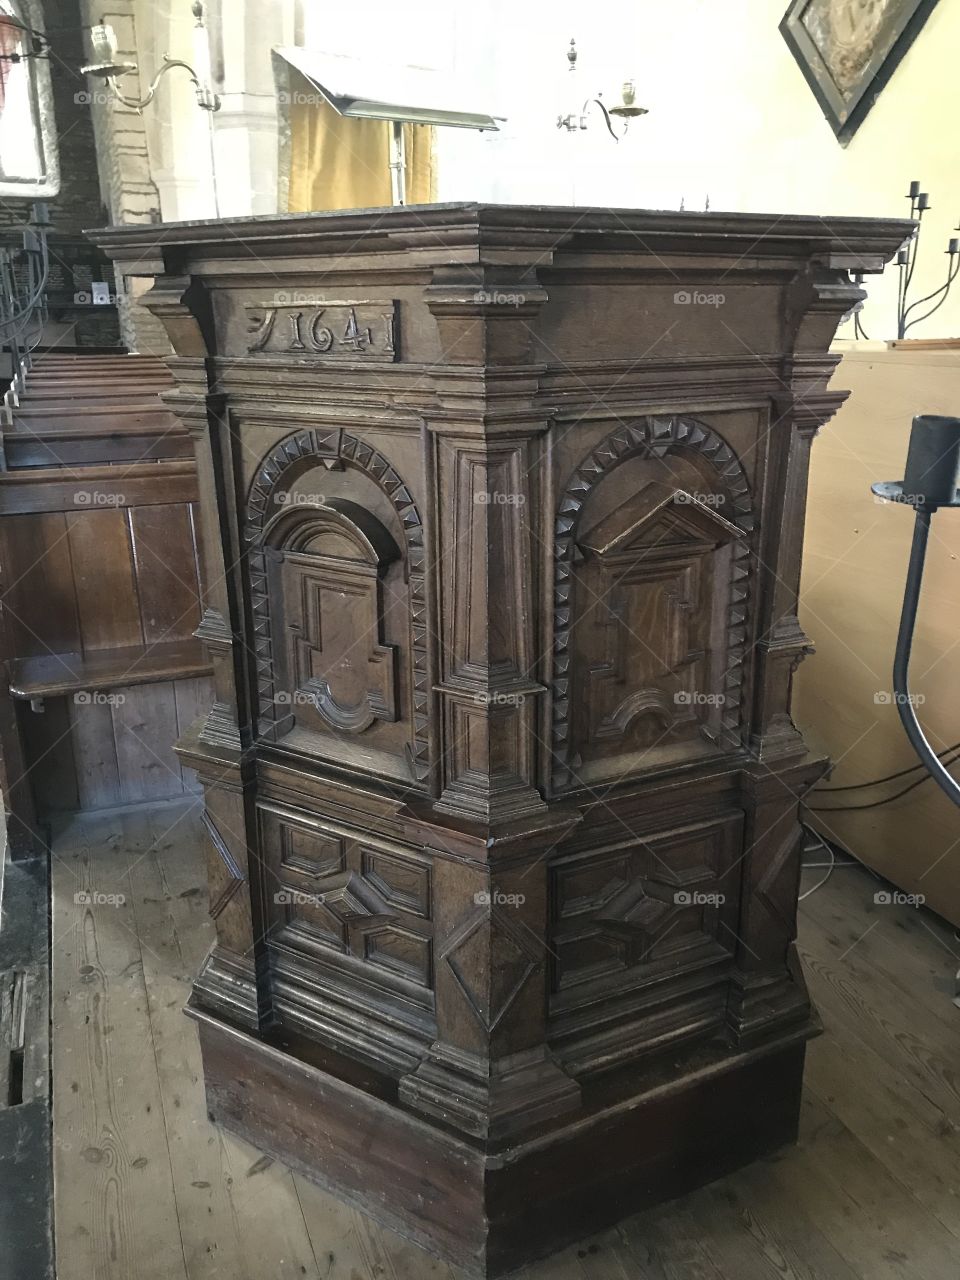 I was impression by the sheer scale of the efforts that have been made to produce a pulpit at St Petrox  Church, which gives an impression that it’s contents our made of gold.